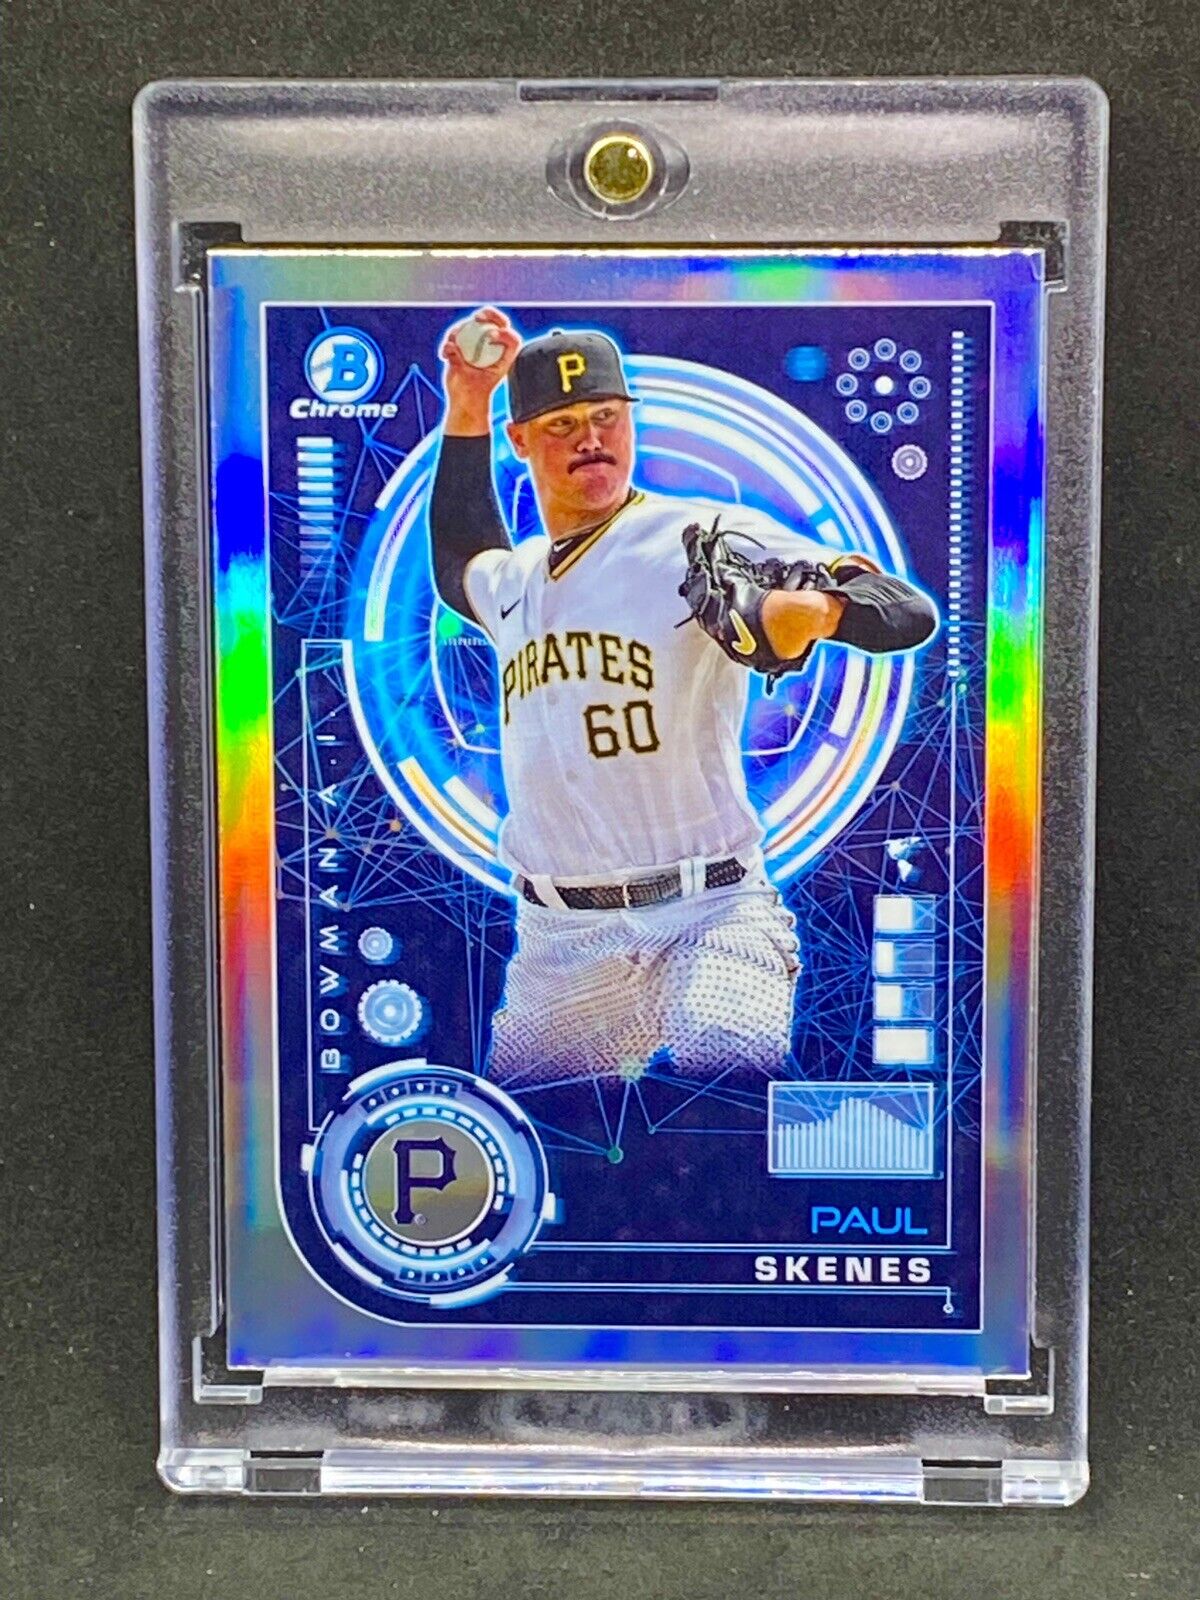 Paul Skenes RARE ROOKIE RC REFRACTOR BOWMAN CHROME INVESTMENT CARD PIRATES ROY